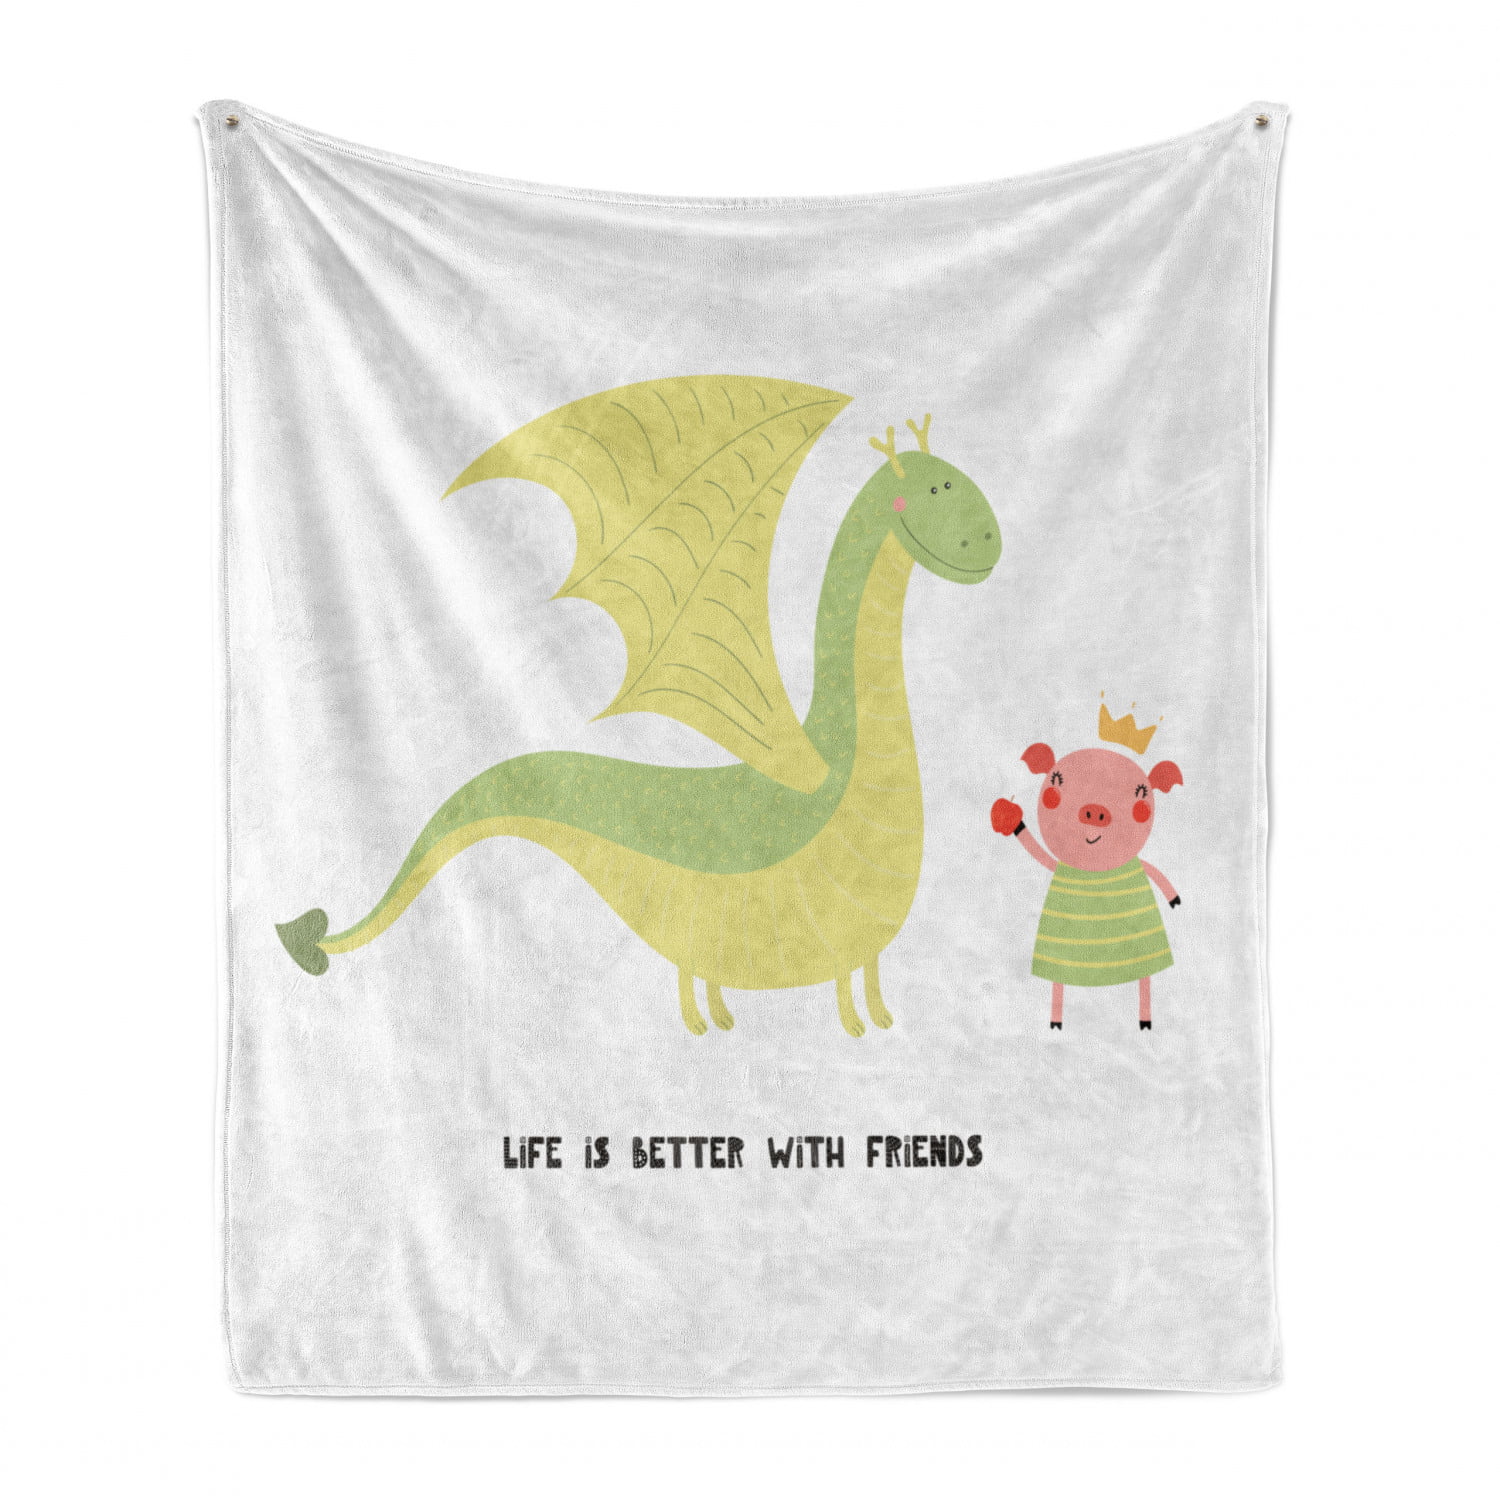 50 x 70 Pistachio Green Coral Flannel Fleece Accent Piece Soft Couch Cover for Adults Life is Better with Friends Calligraphy and a Pig Ambesonne Dragon Throw Blanket